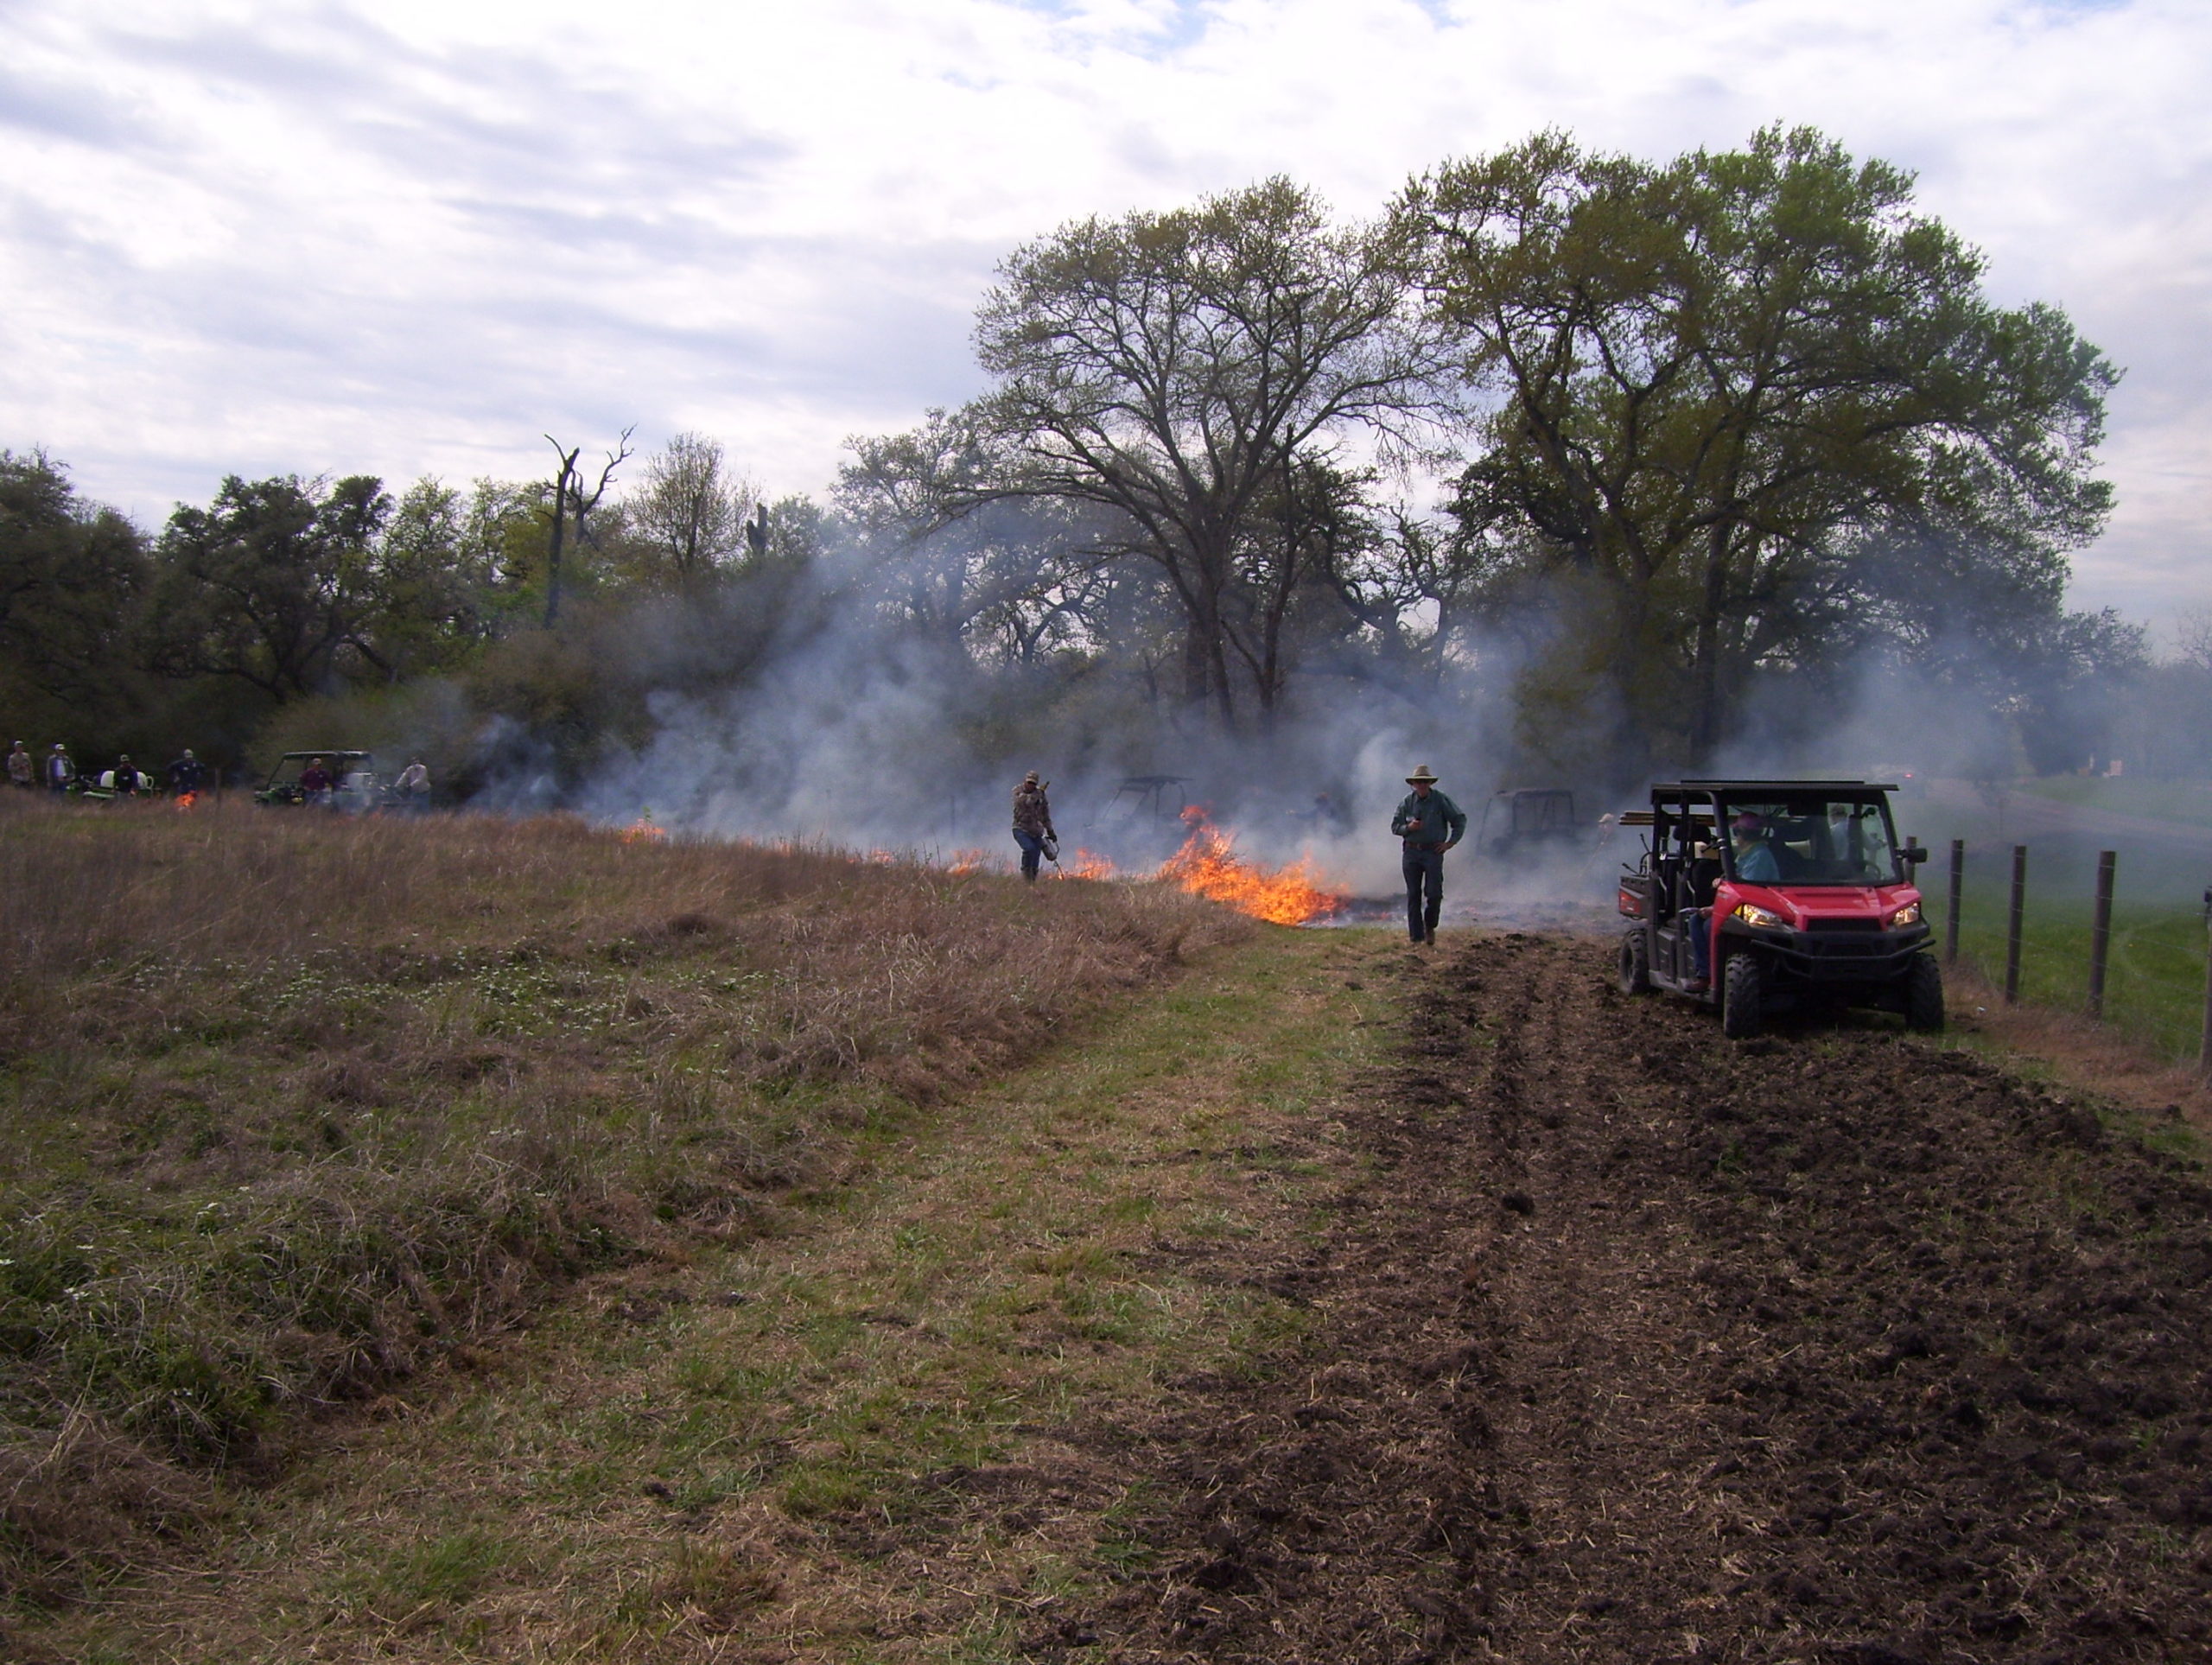 Members on a burn, fire burning in the background